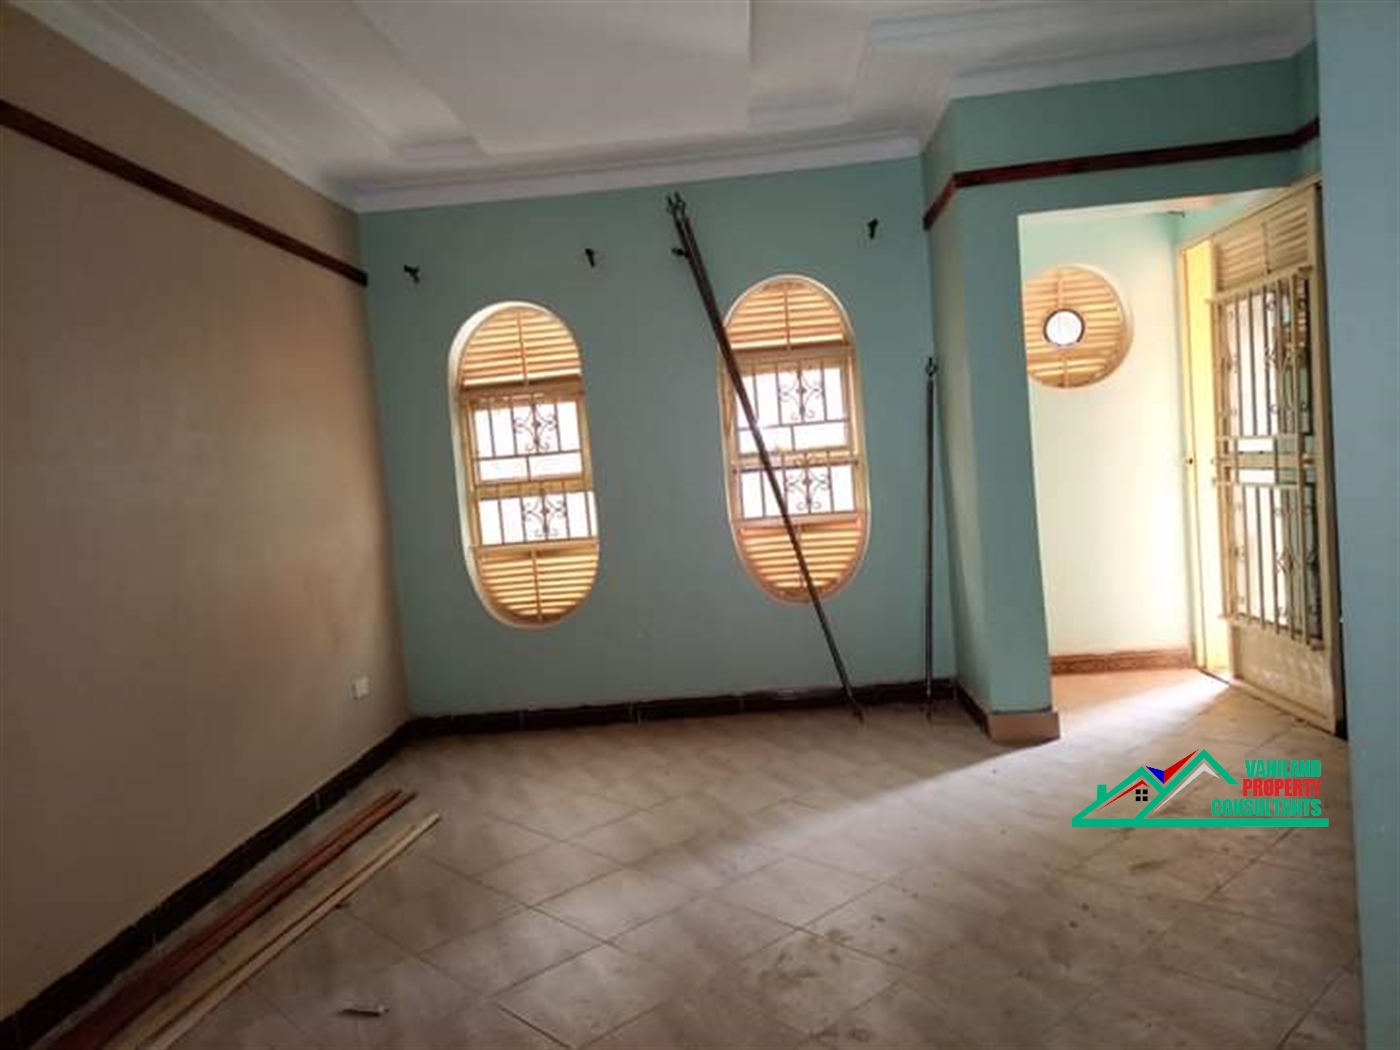 Bungalow for rent in Nsasa Wakiso